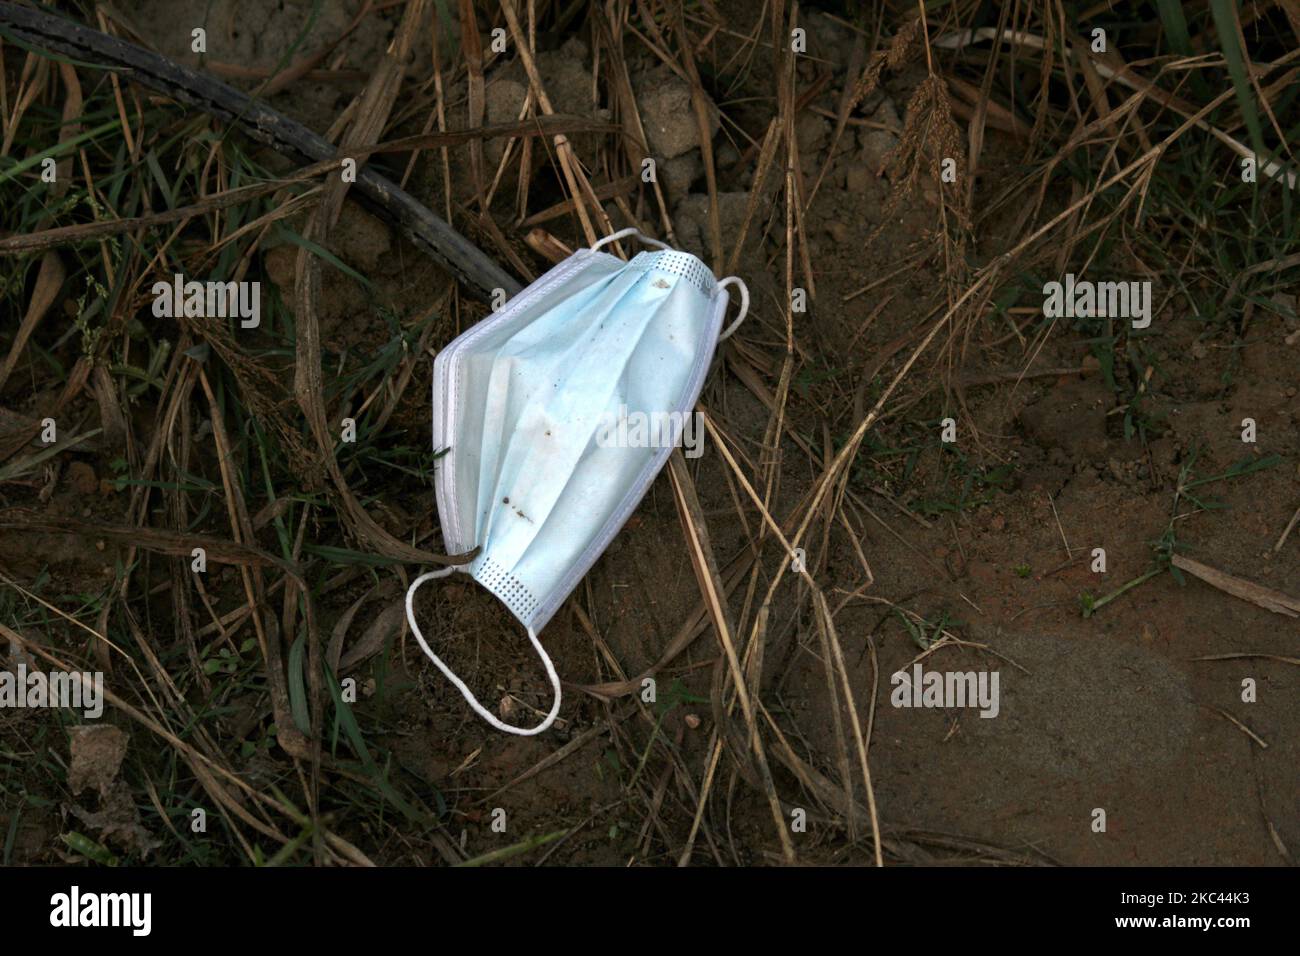 Discarded personal protective equipment's such as masks, gloves and kits are seen scattered all over the graveyard, at Jadid Qabristan Ahle - Islam graveyard, on November 12, 2020 in New Delhi. India has reported 48,285 fresh Covid-19 cases in the past 24 hours. The total caseload now stands at 8,684,039. The country's death toll has mounted to 128,164. (Photo by Mayank Makhija/NurPhoto) Stock Photo